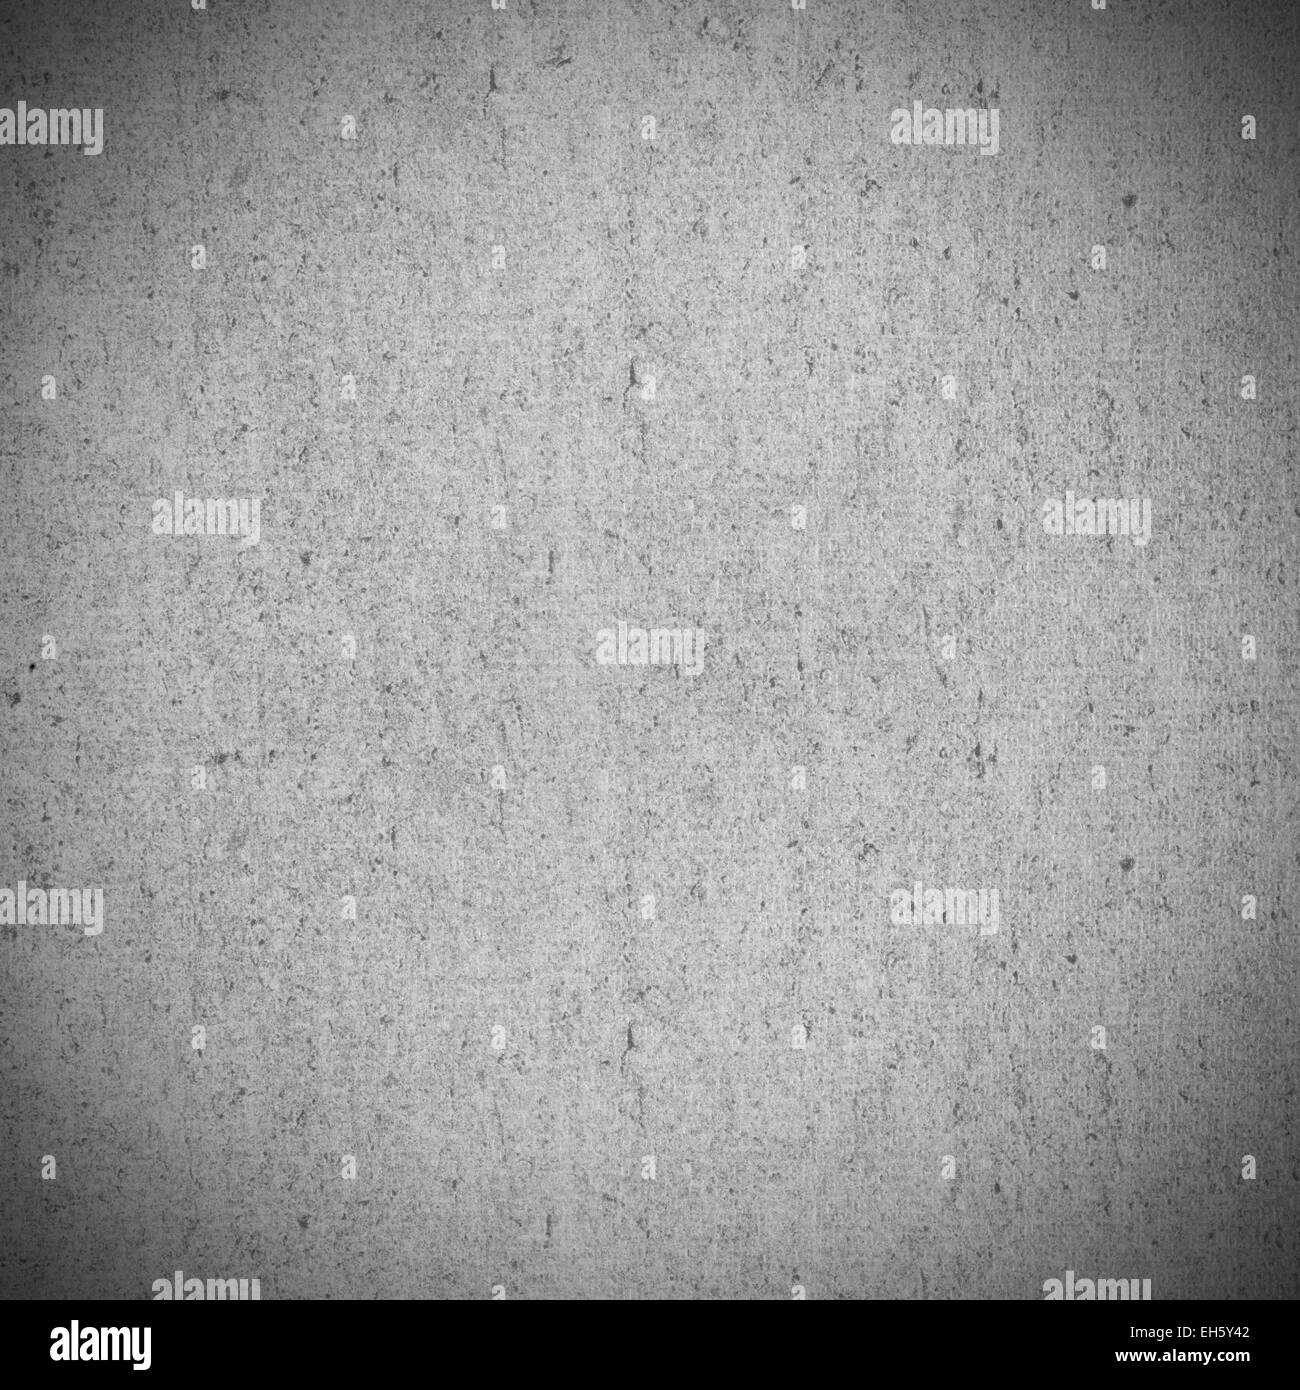 gray rough pattern texture or abstract background Stock Photo